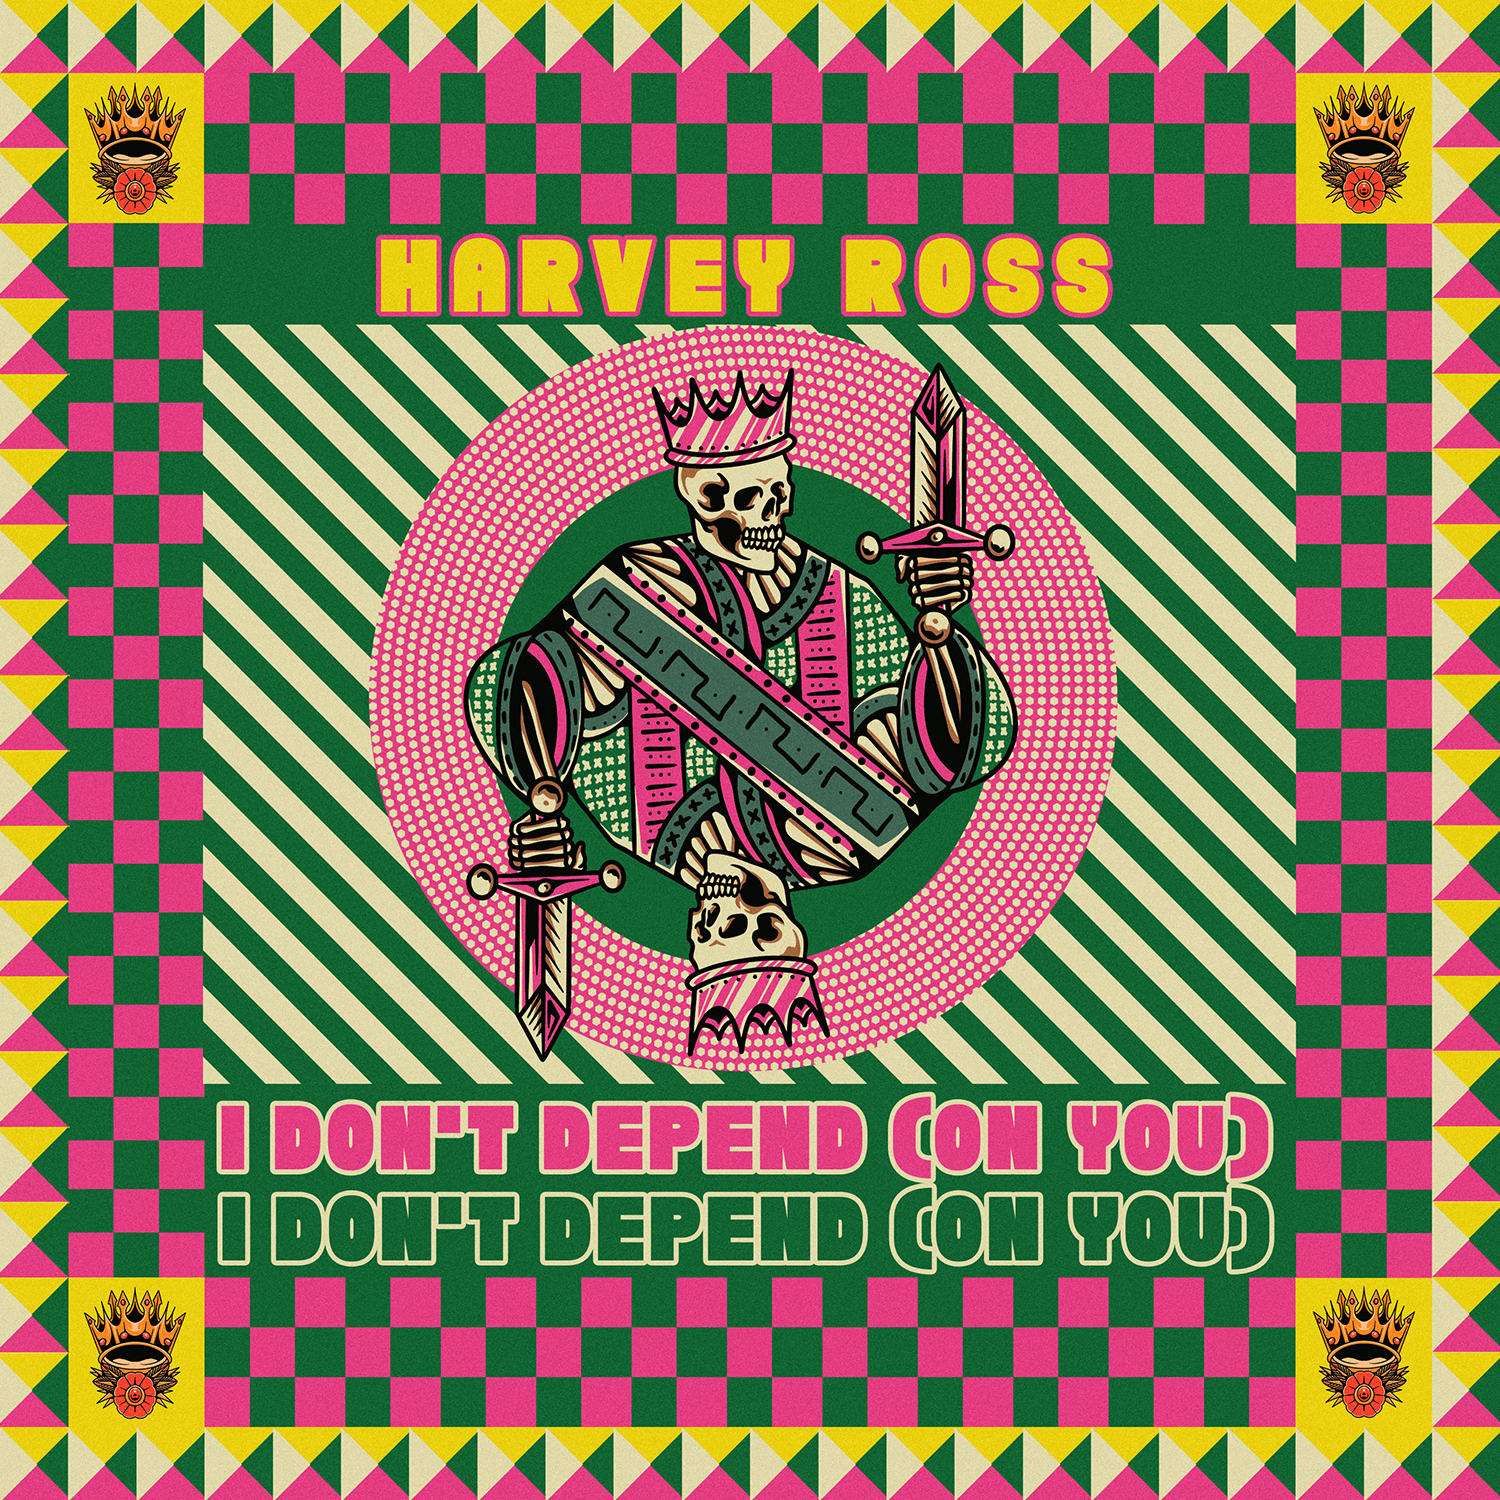 Harvey Ross - I Don't Depend (On You)